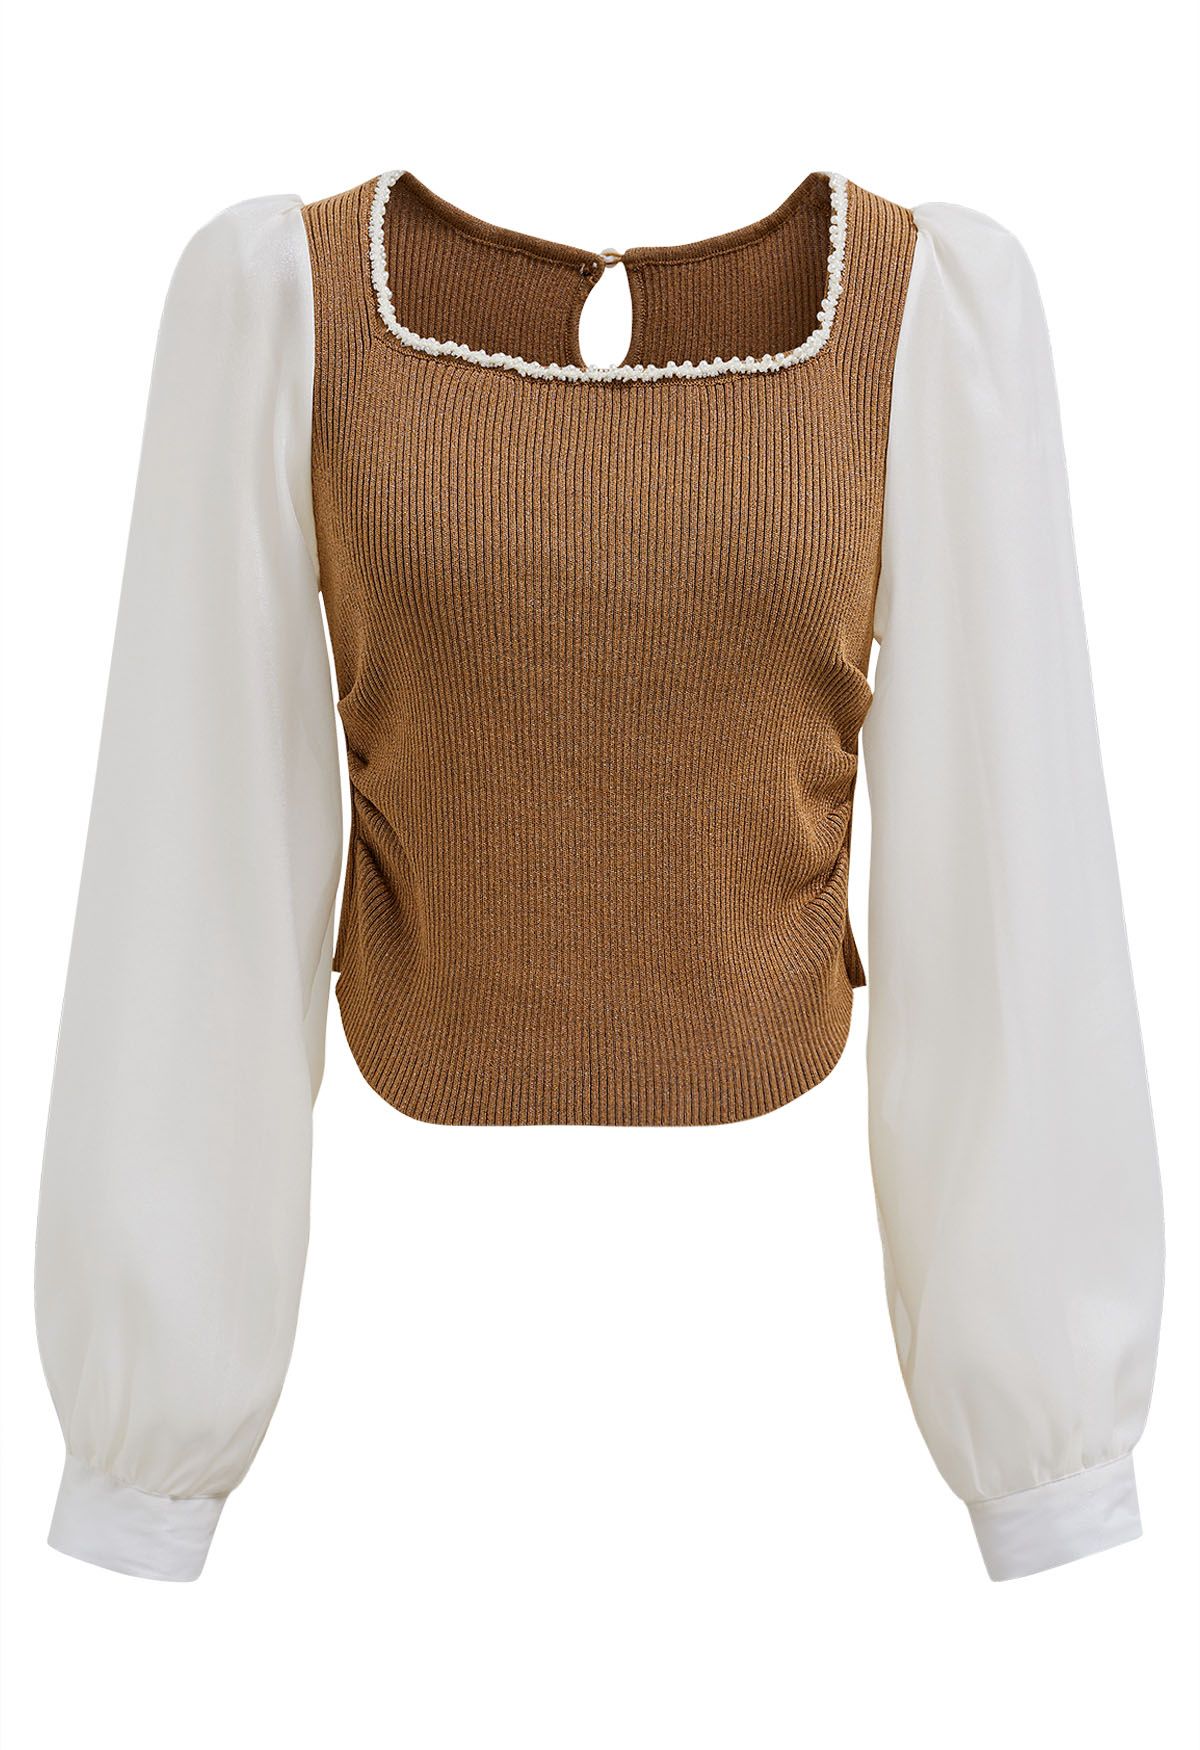 Beaded Square Neck Spliced Puff Sleeve Knit Top in Caramel